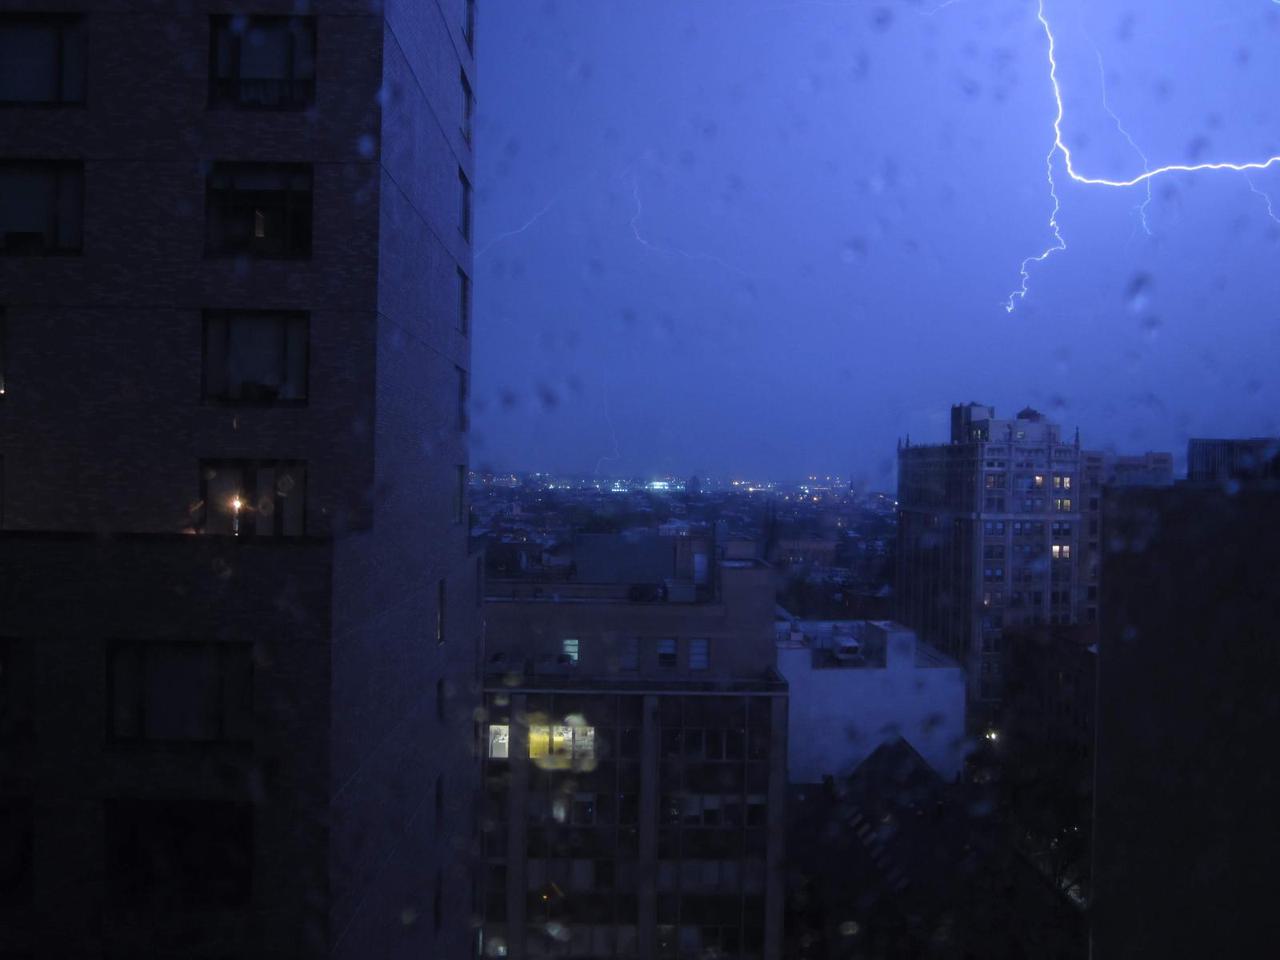 lightning during storm as viewed from my window